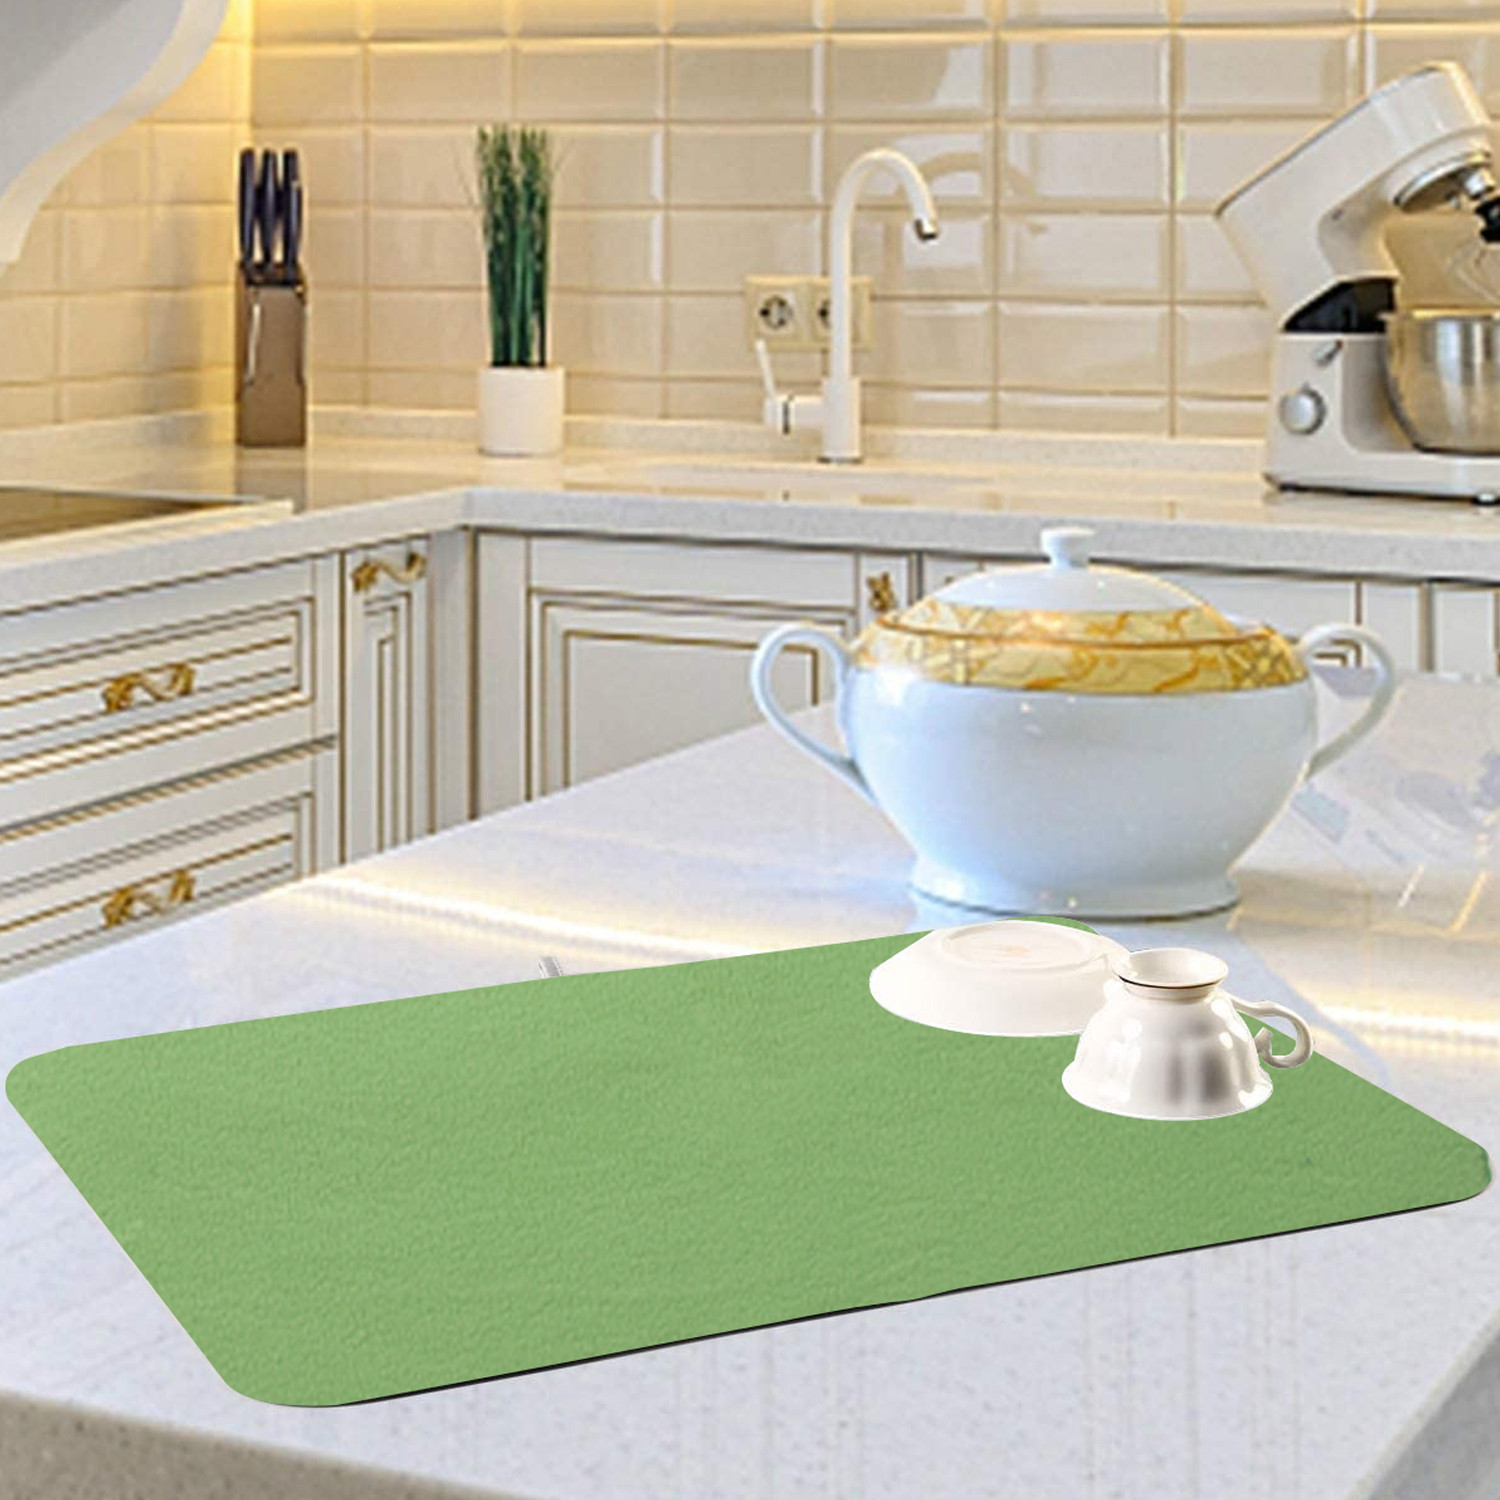 Kuber Industries Microfiber Reversible Dish Drying Mat With Absorbent Parity For Kitchen 27